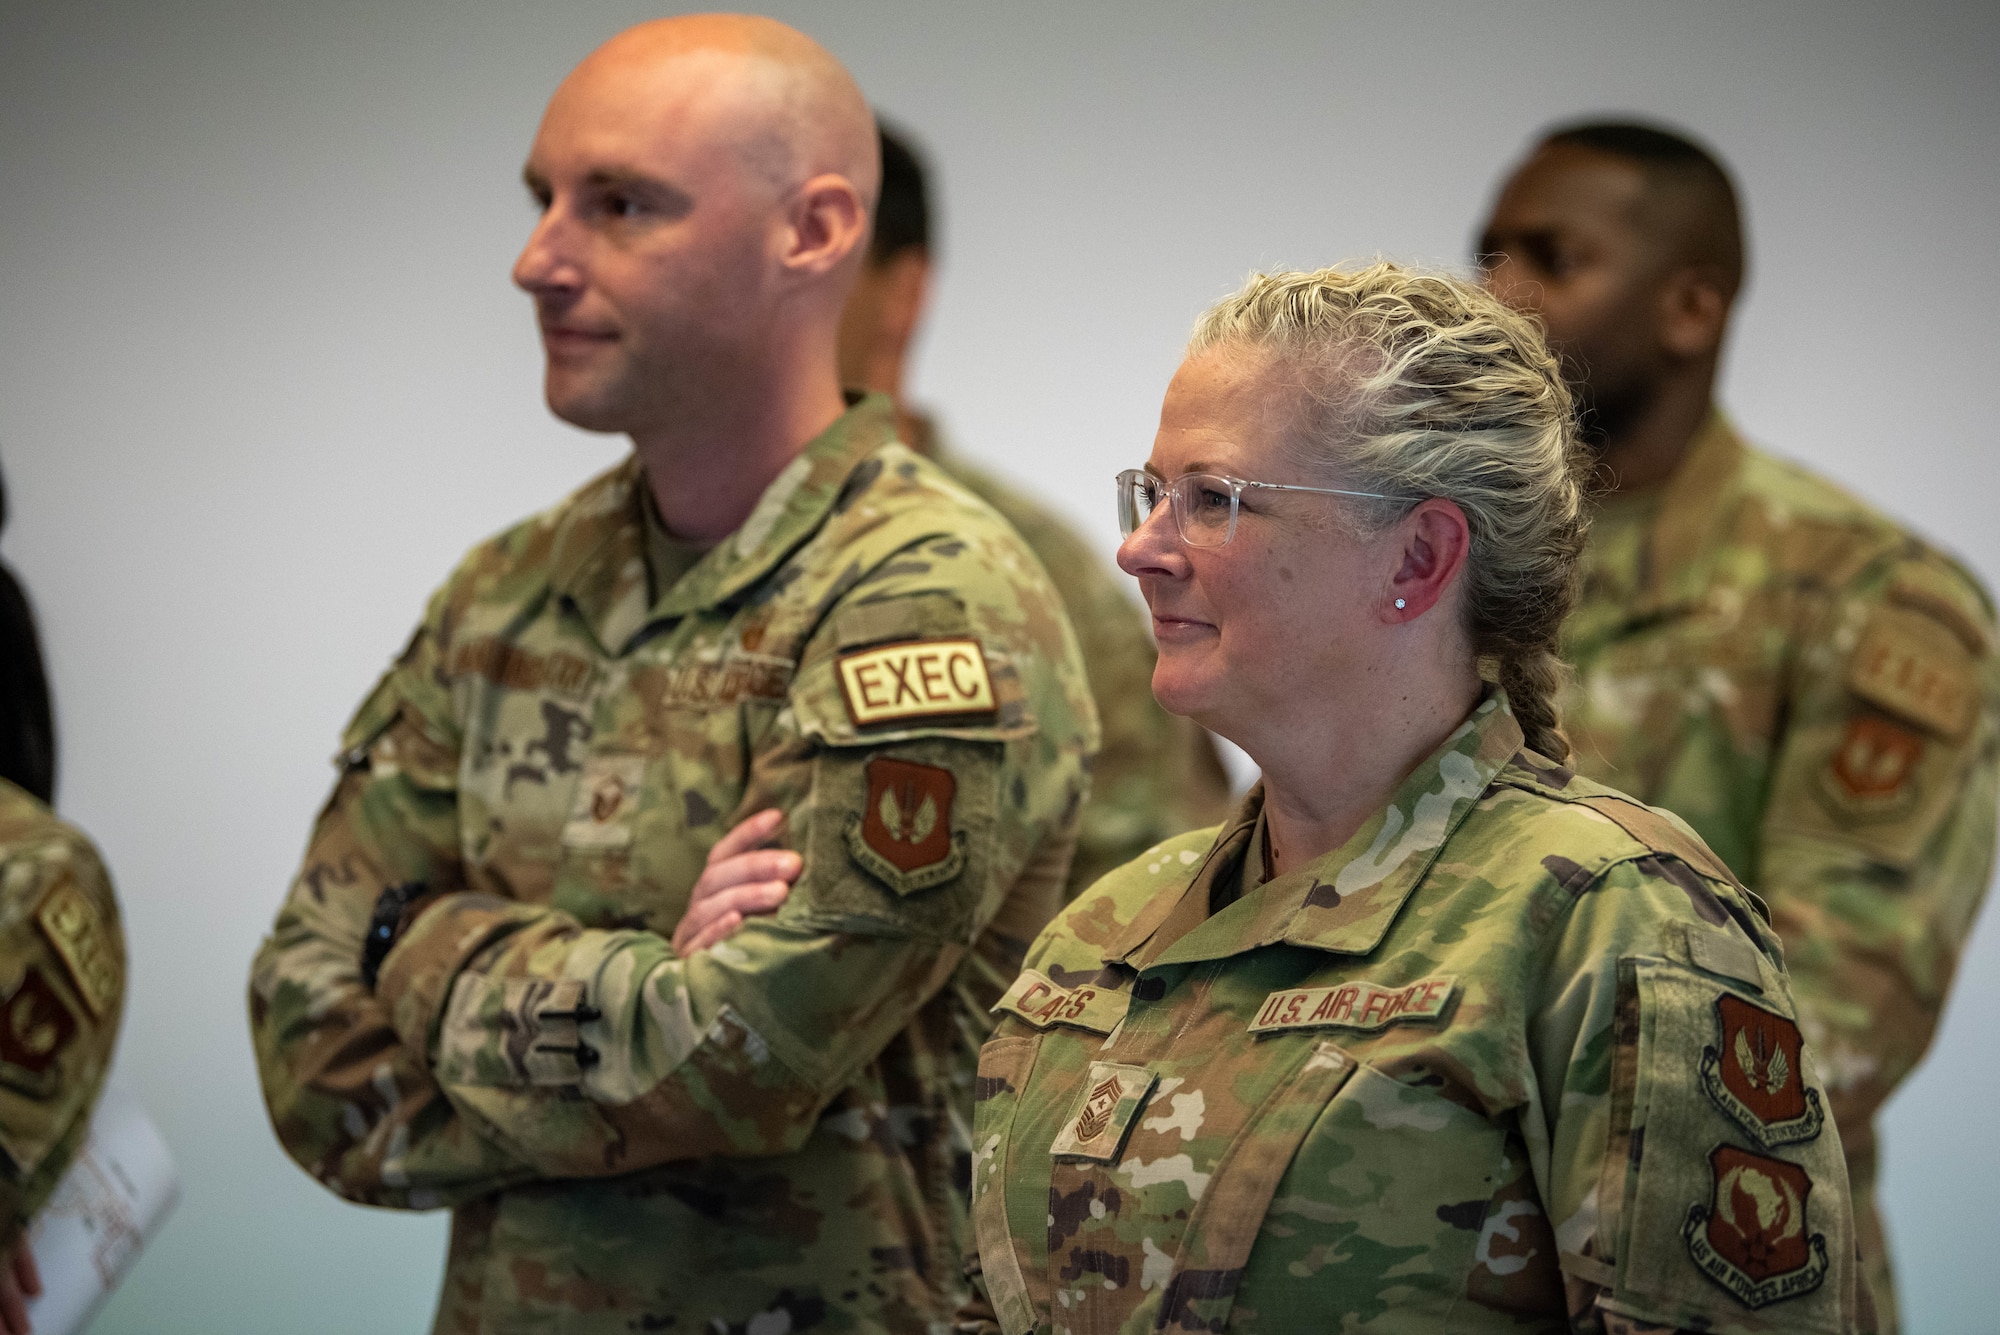 U.S. Air Force Chief Master Sgt. Stephanie Cates, Third Air Force command chief, visits the newly established Information, Tickets and Travel office